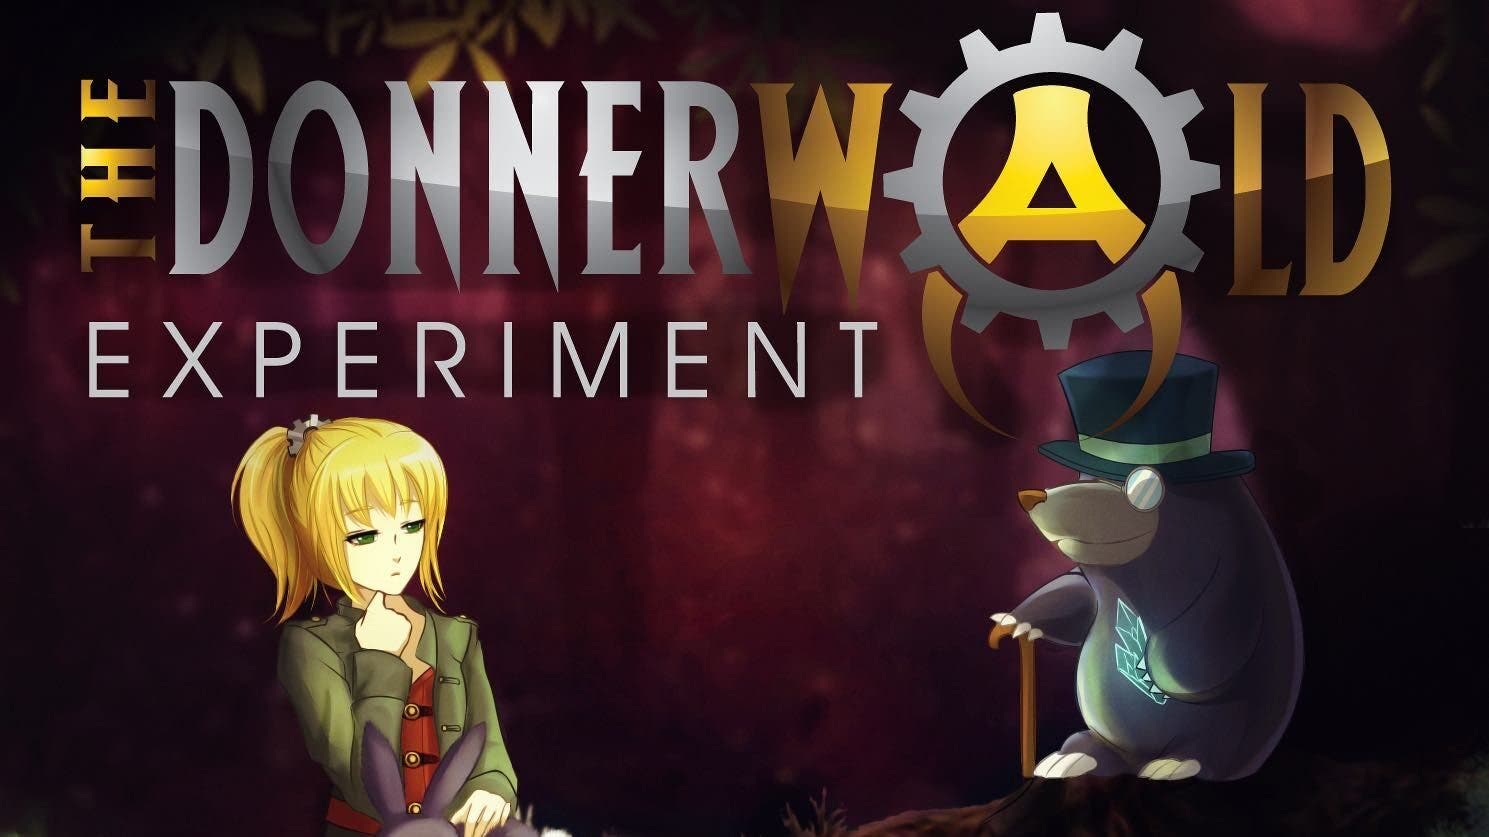 The Donnerwald Experiment: Chapter 2 queda confirmado para Nintendo Switch